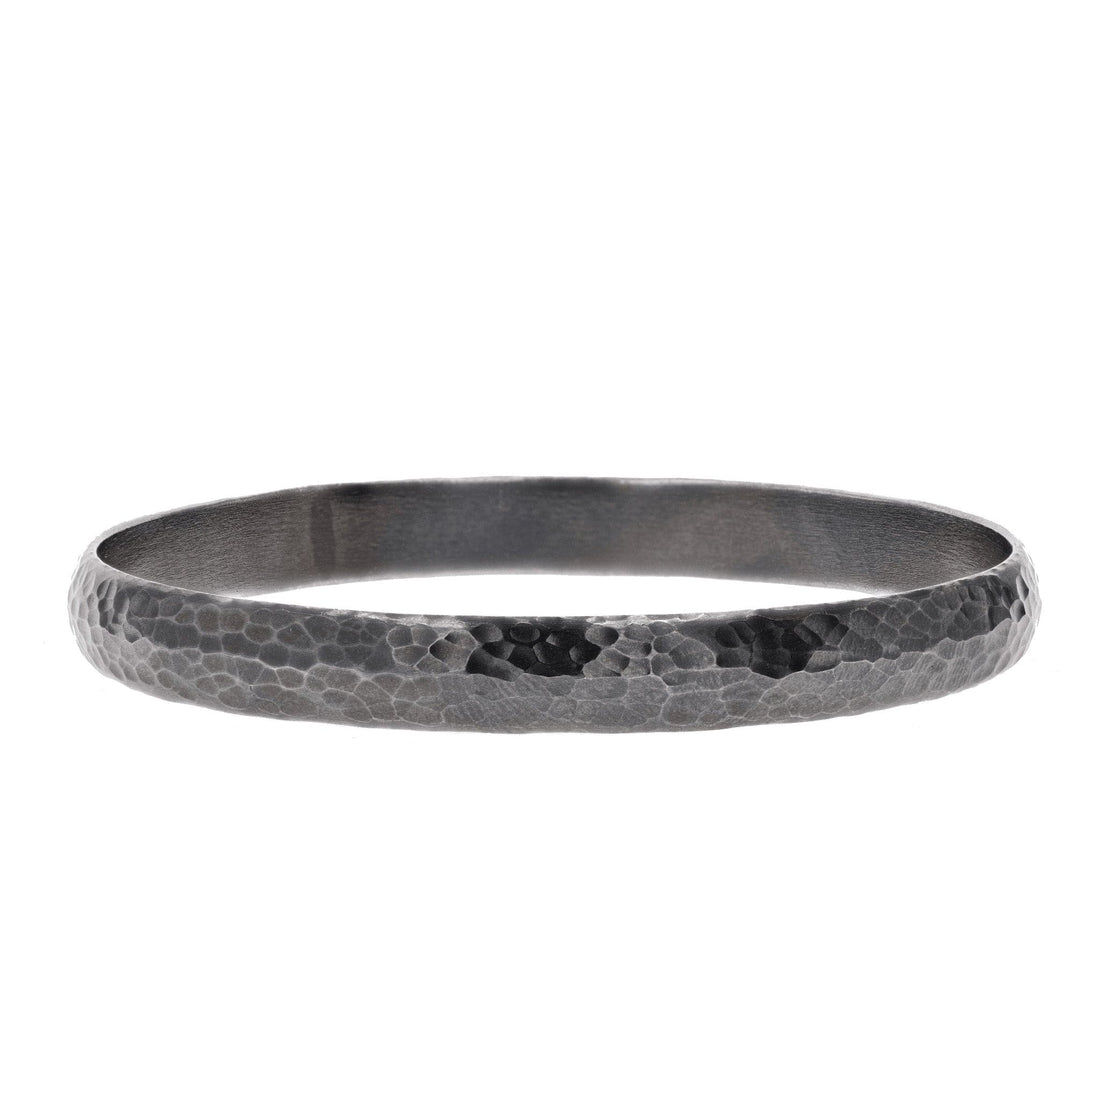 Oxidized Sterling Silver Hammered Fusion Bangle by Lika Behar - Skeie's Jewelers